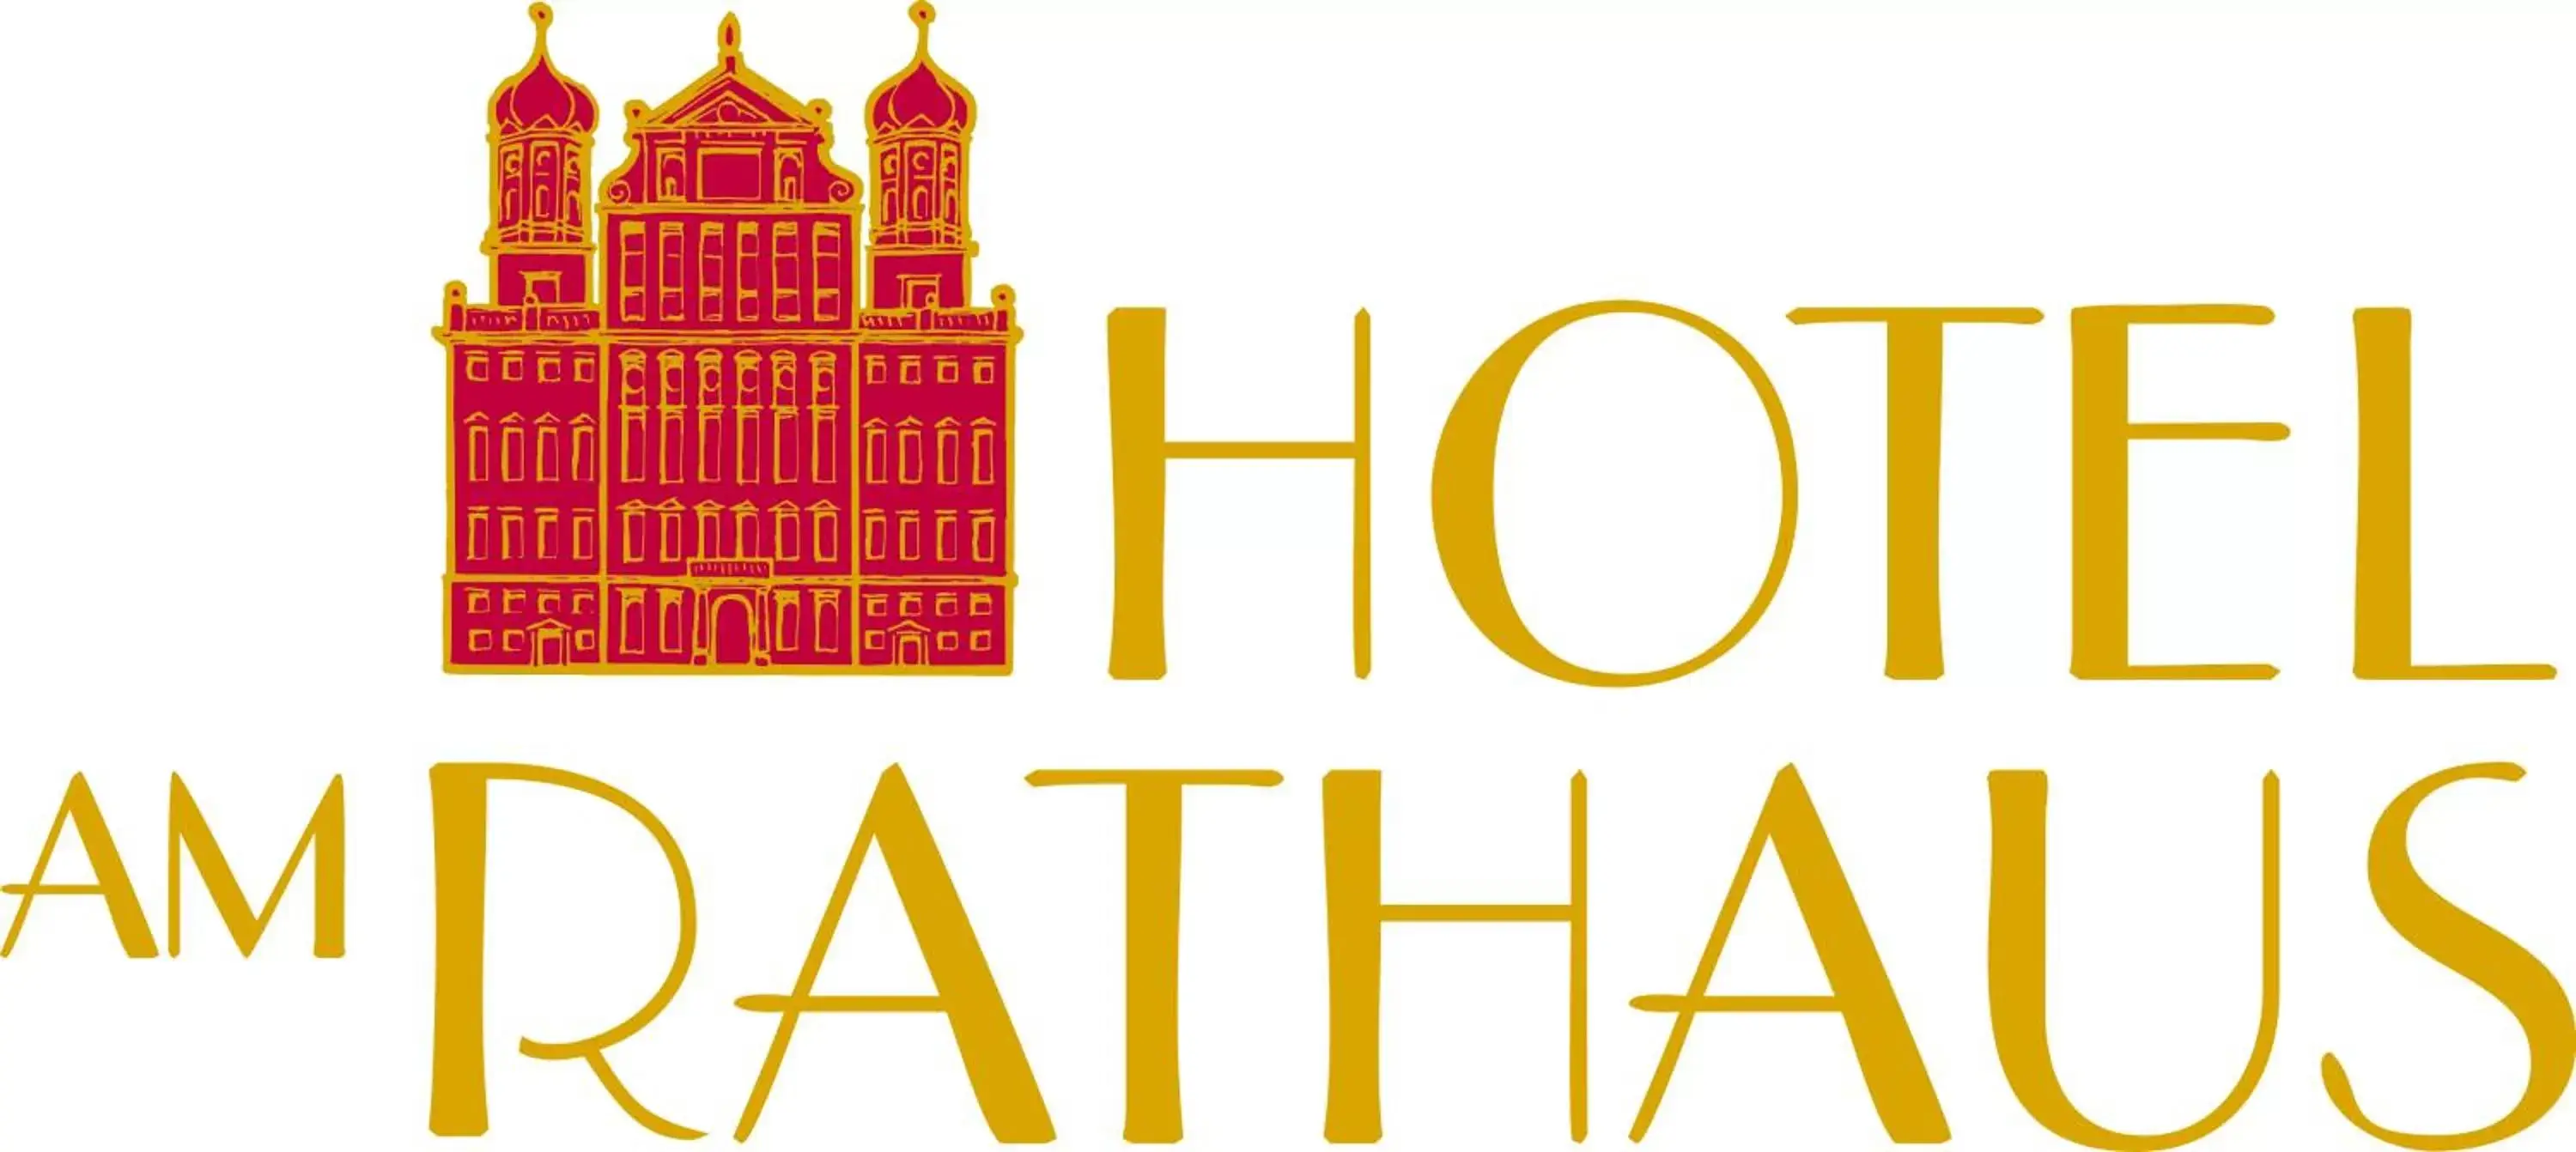 Property logo or sign in Hotel am Rathaus